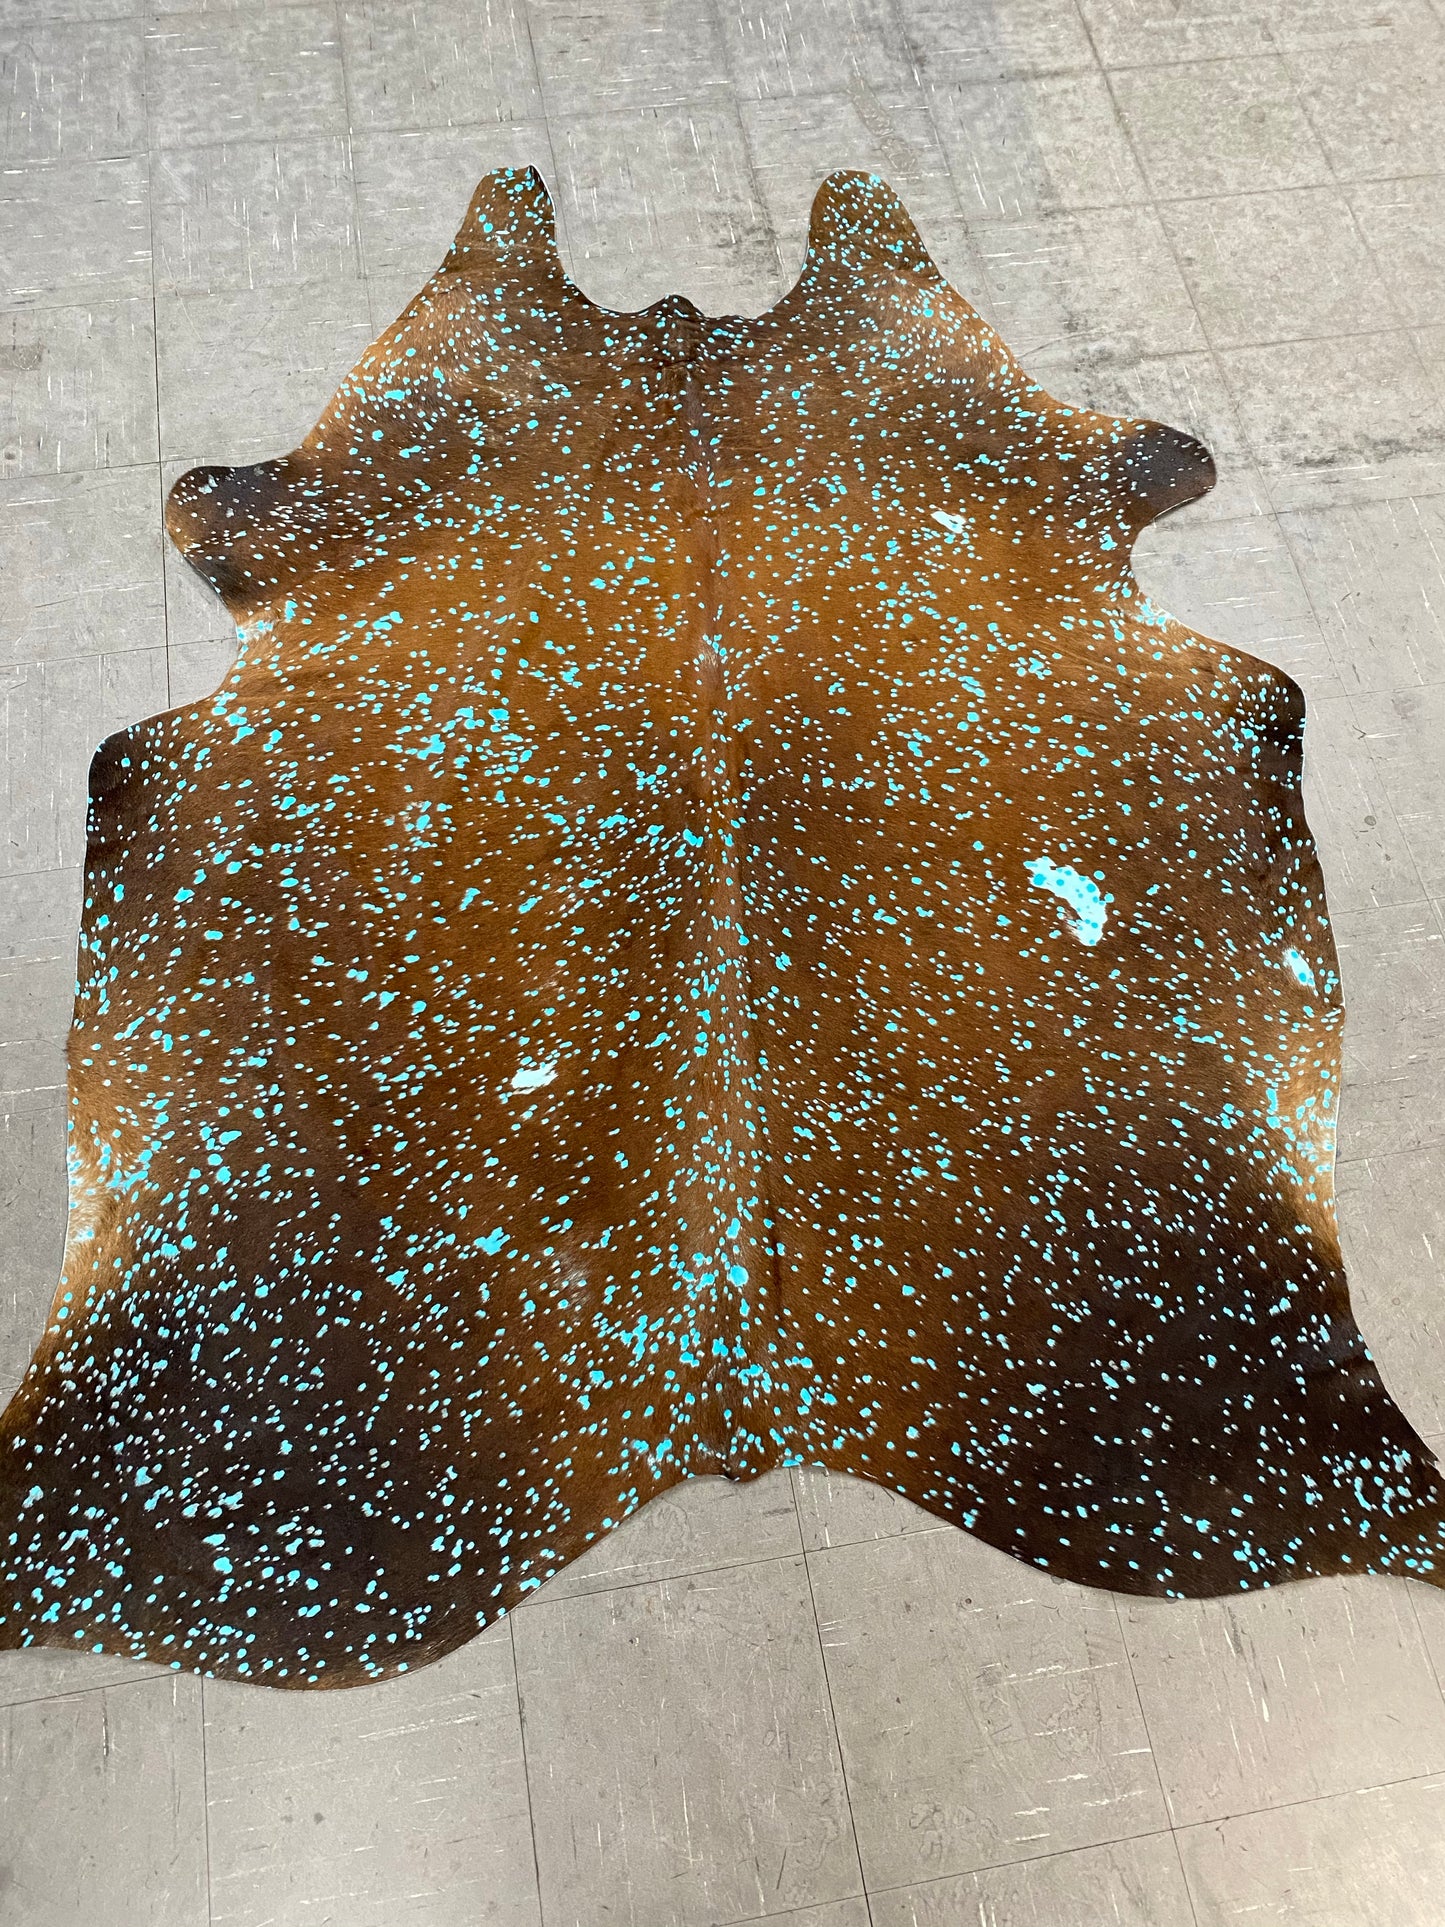 Dyed turquoise on brown cowhide